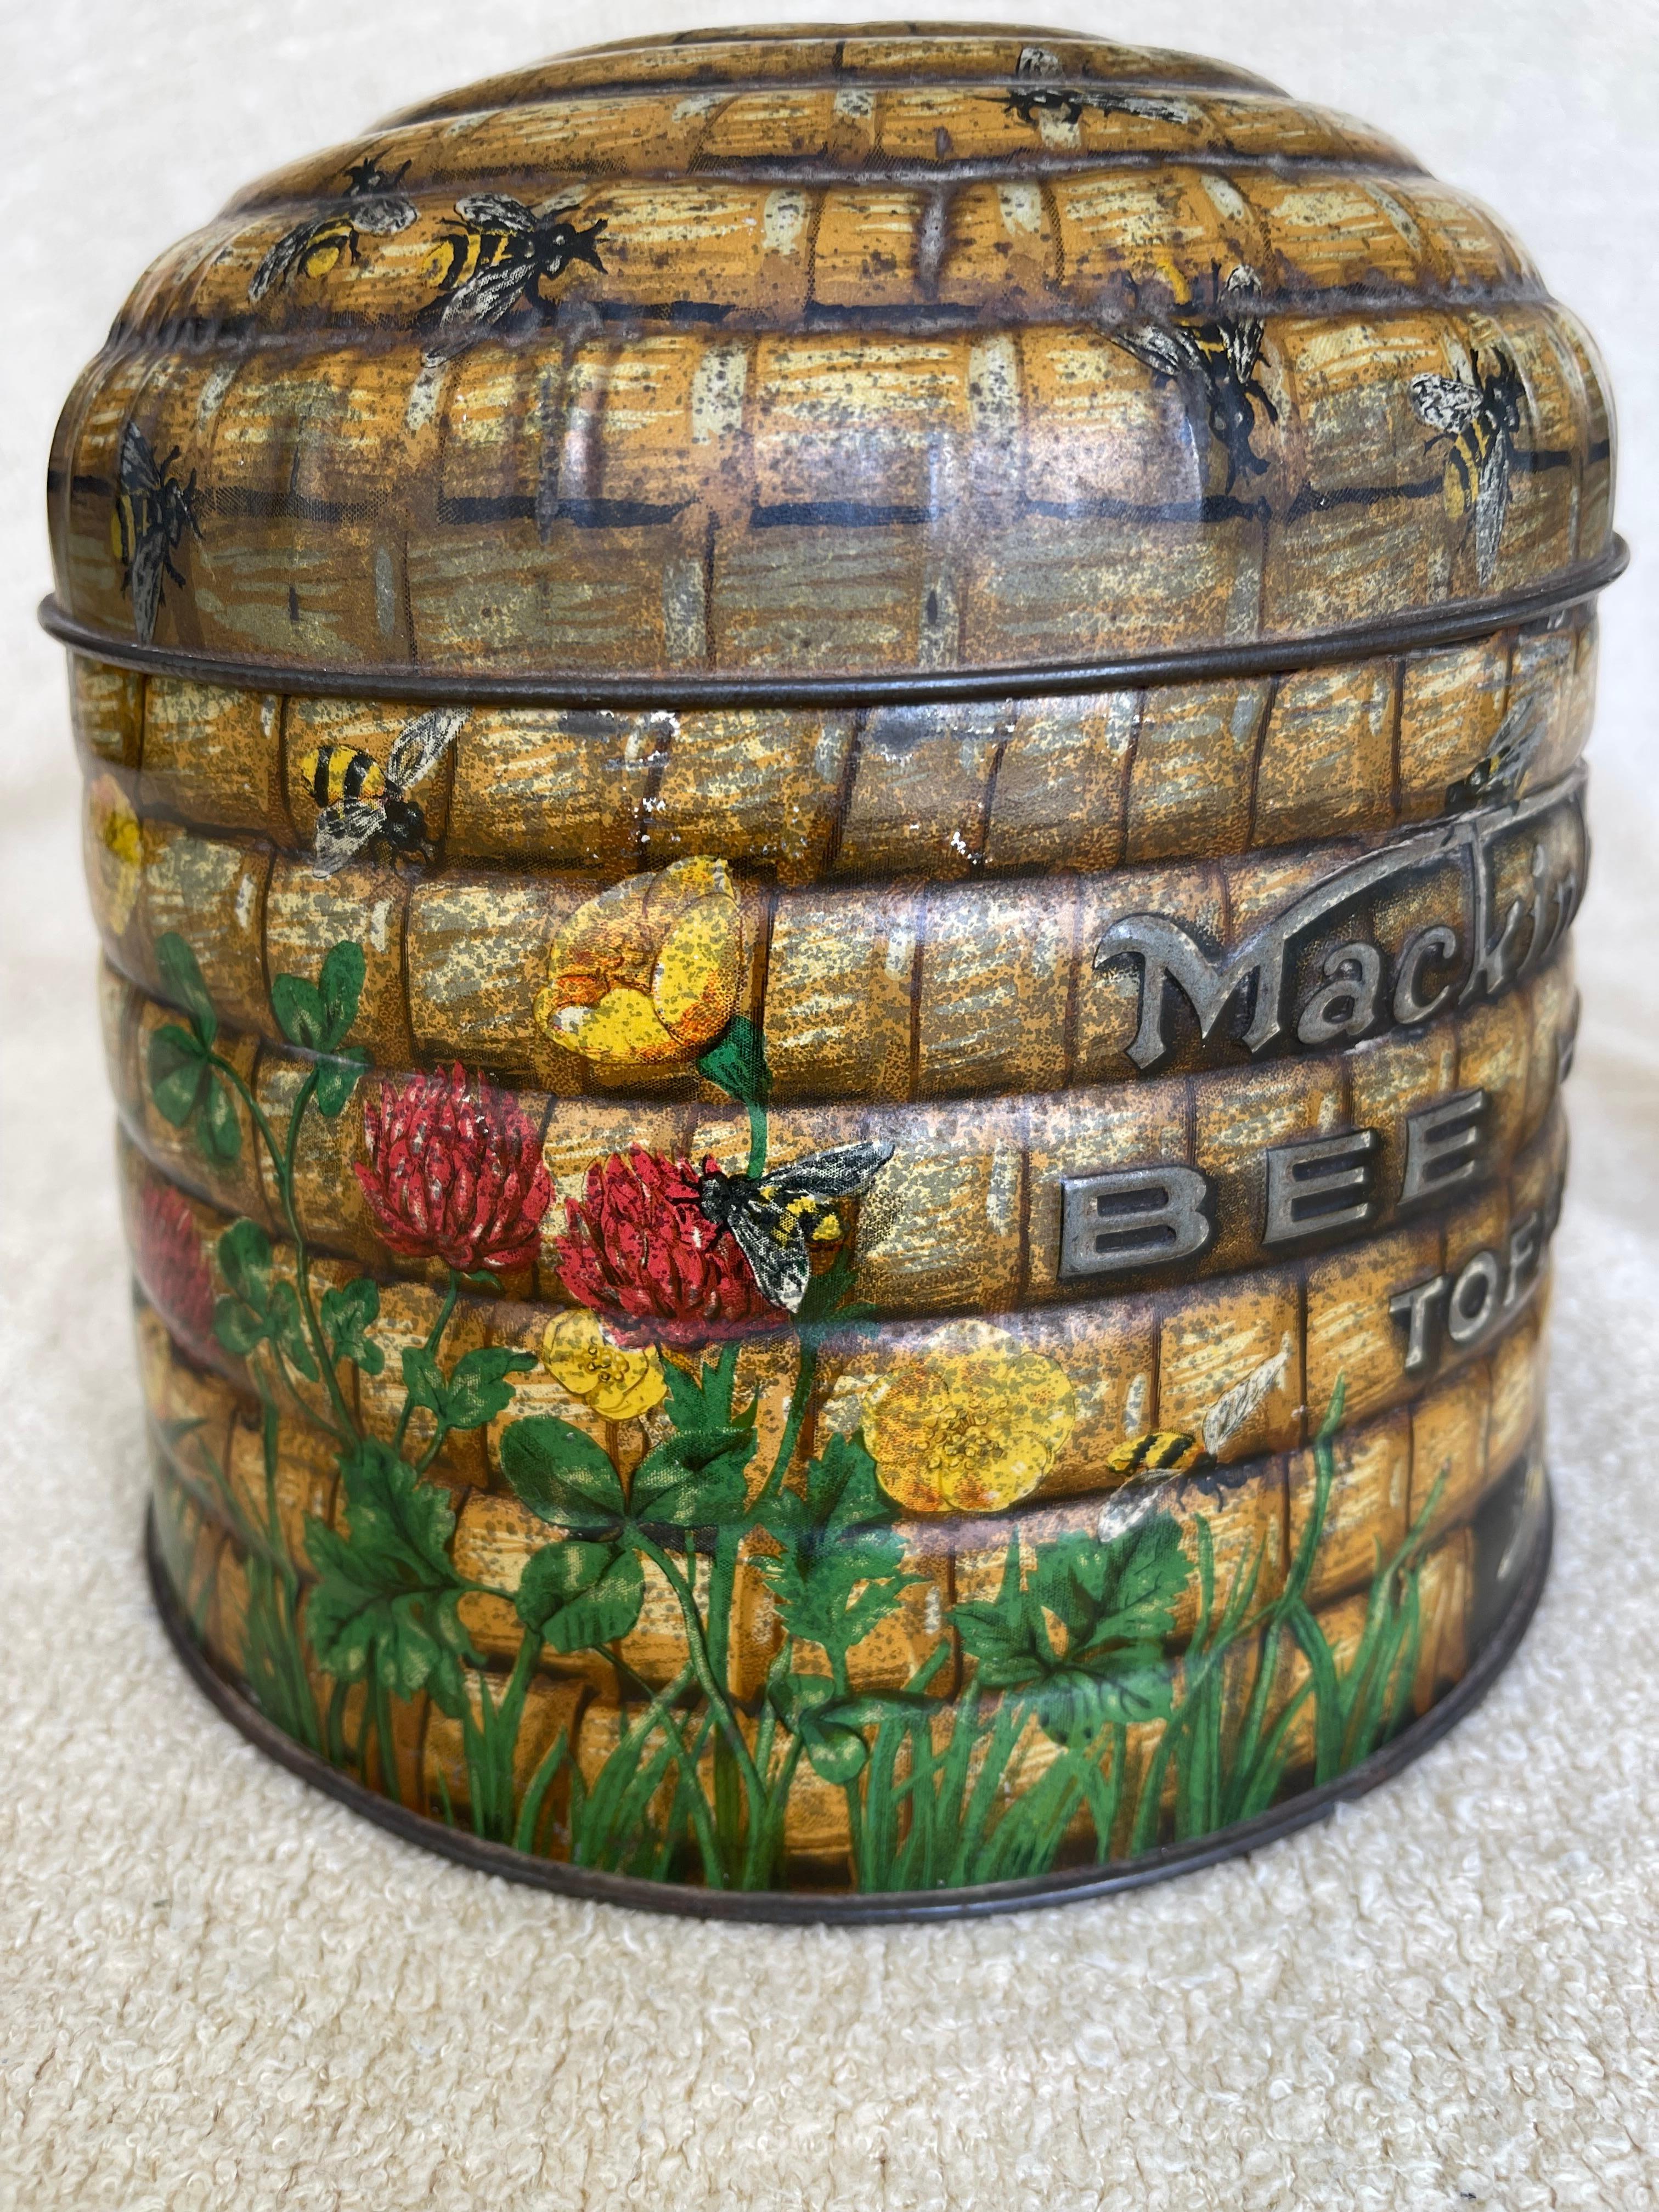  This good size tin is English and made somewhere in the art deco period, 1920's. Originally it held toffee, but certainly can be used for anything. The beauty is in the colorful and unusual graphics. The shape is in a beehive and there are bees and